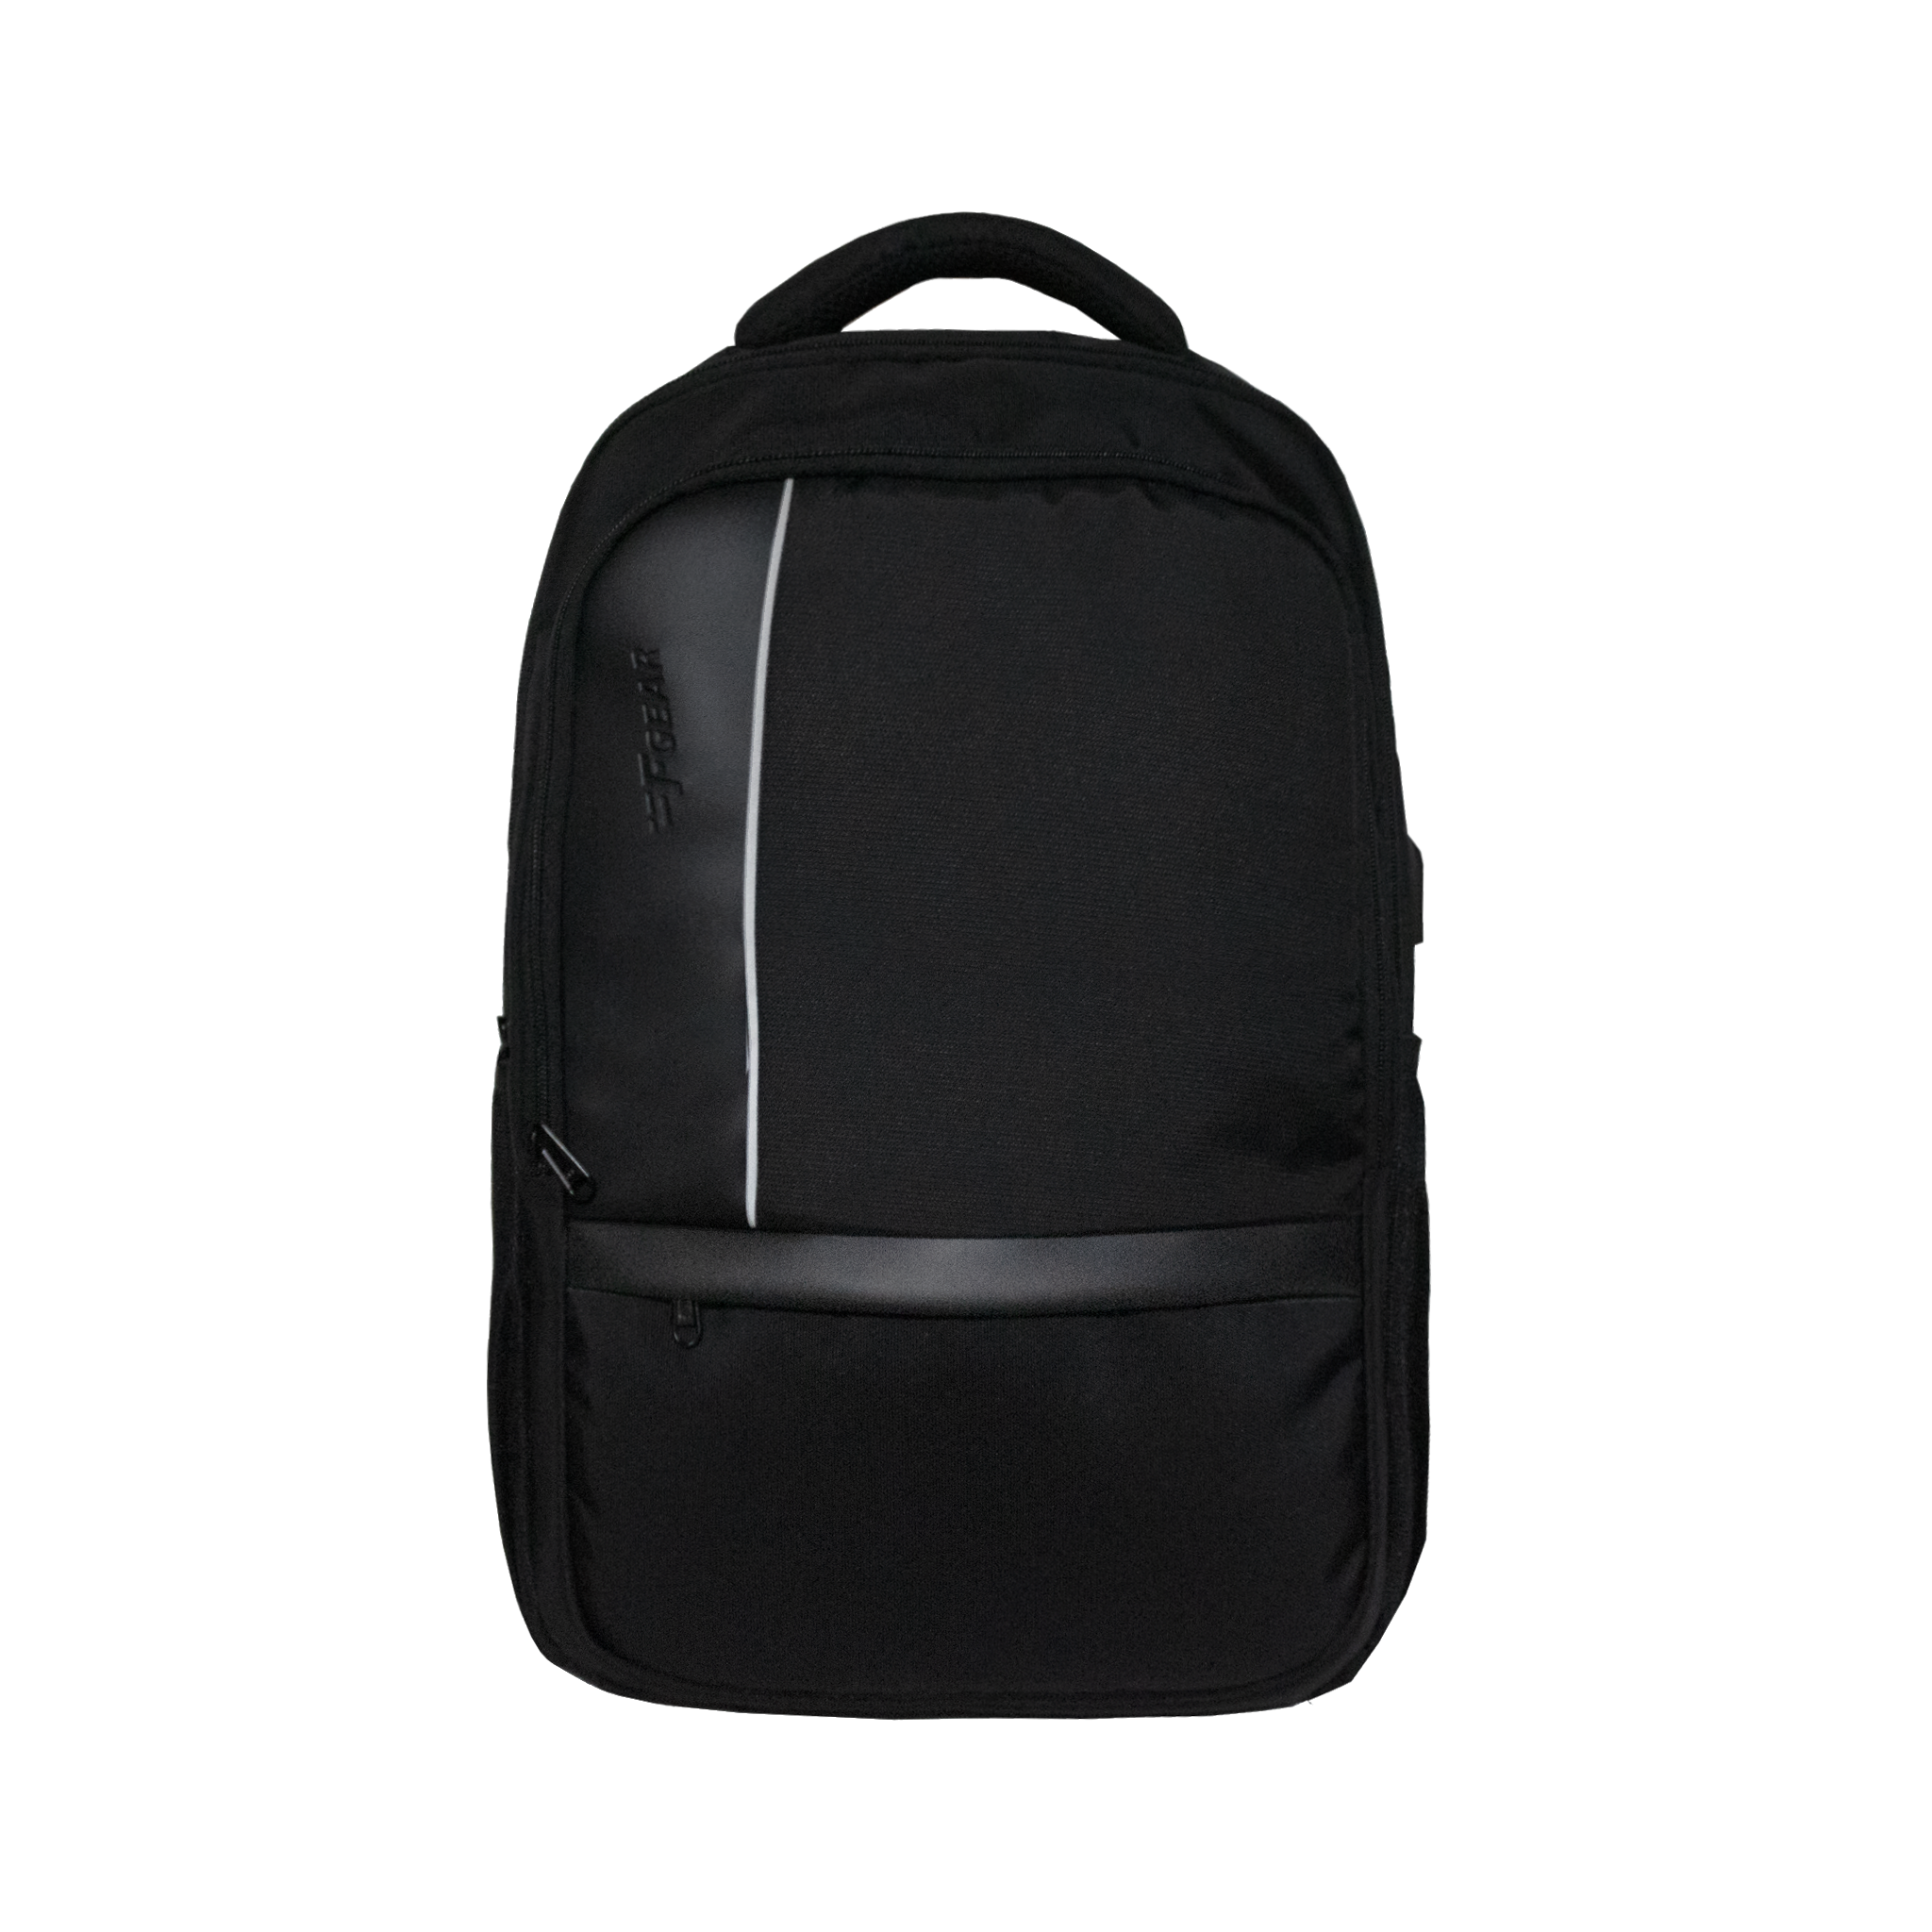 Anti Theft Laptop Backpack With USB Port- VIVIDKART